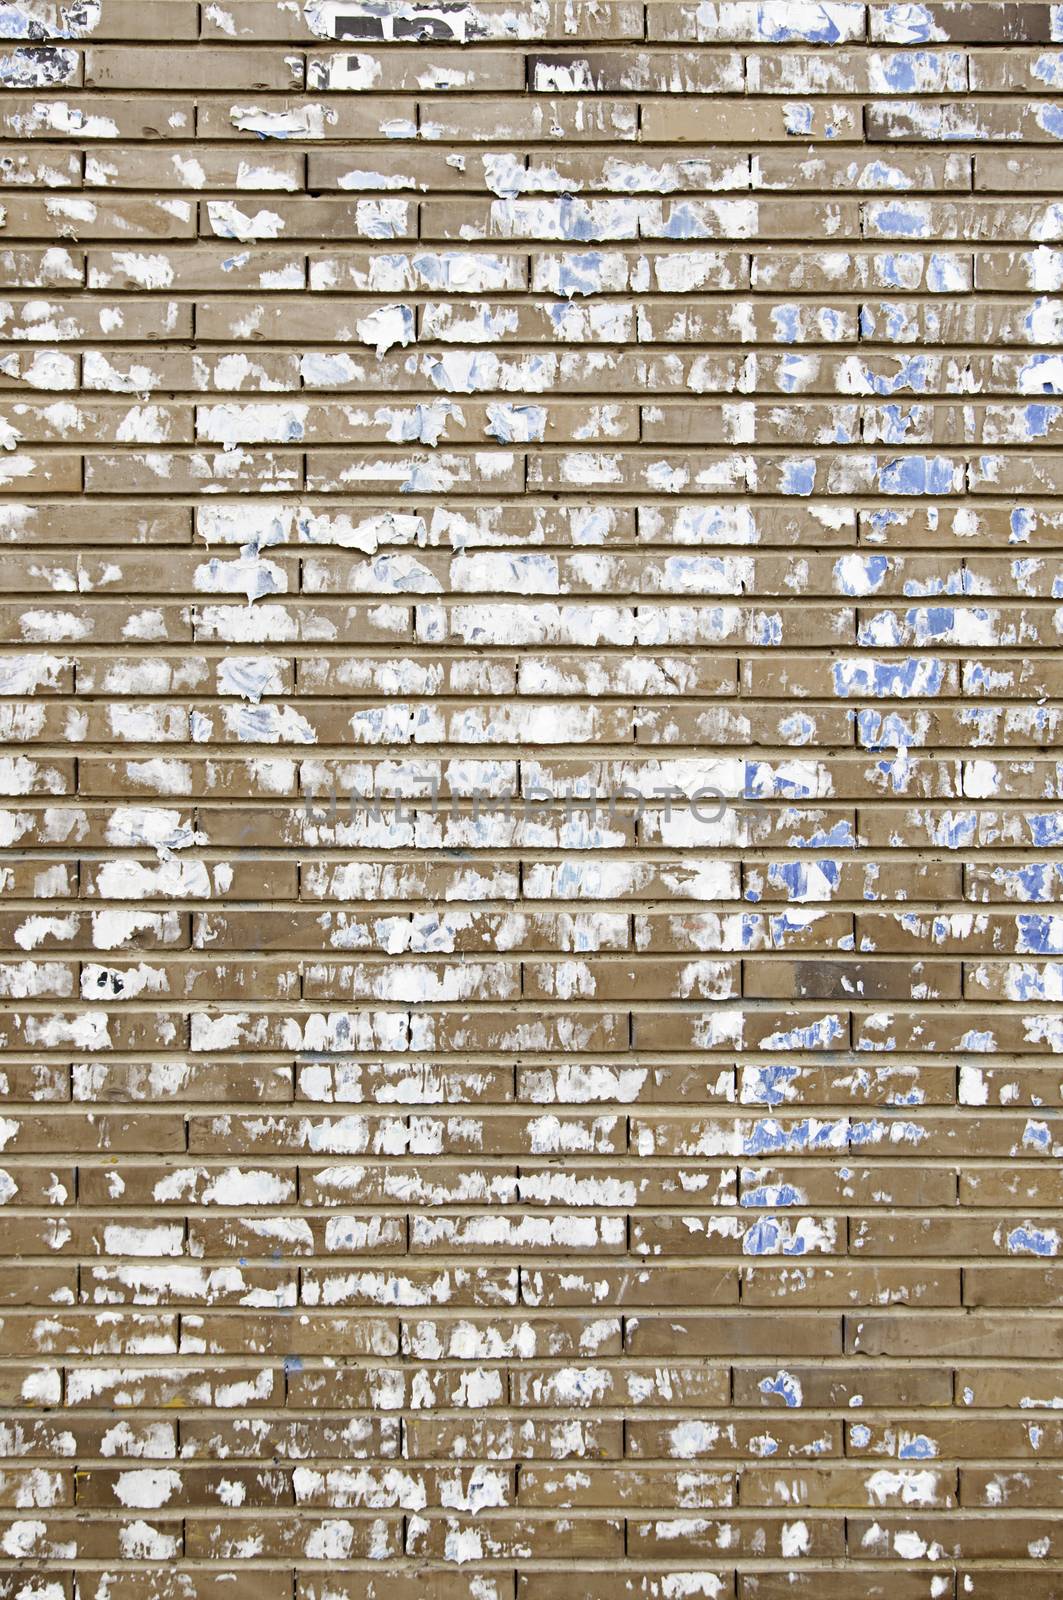 Stained brick wall, detail of a brick wall paper stained